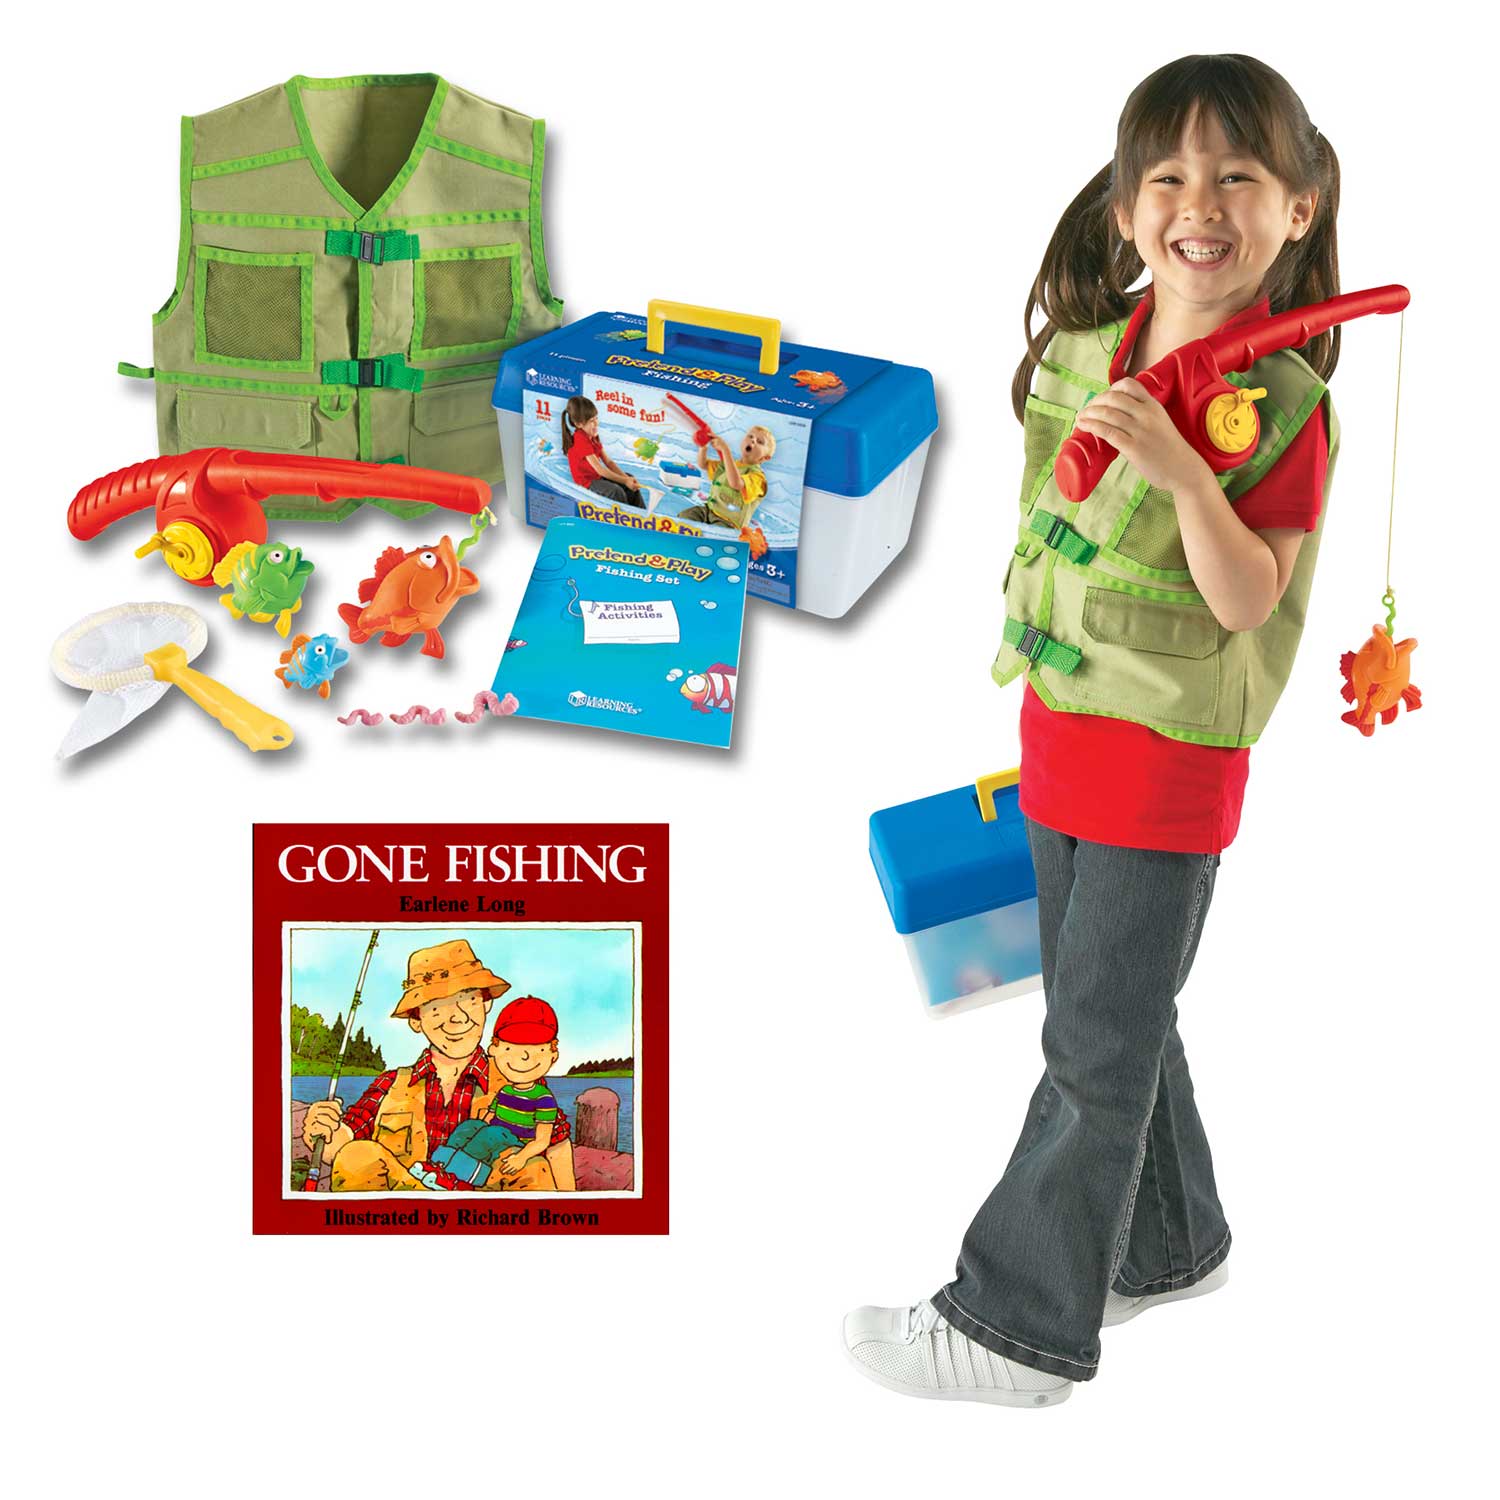 Becker's Let's Go Fishing Dramatic Play Set